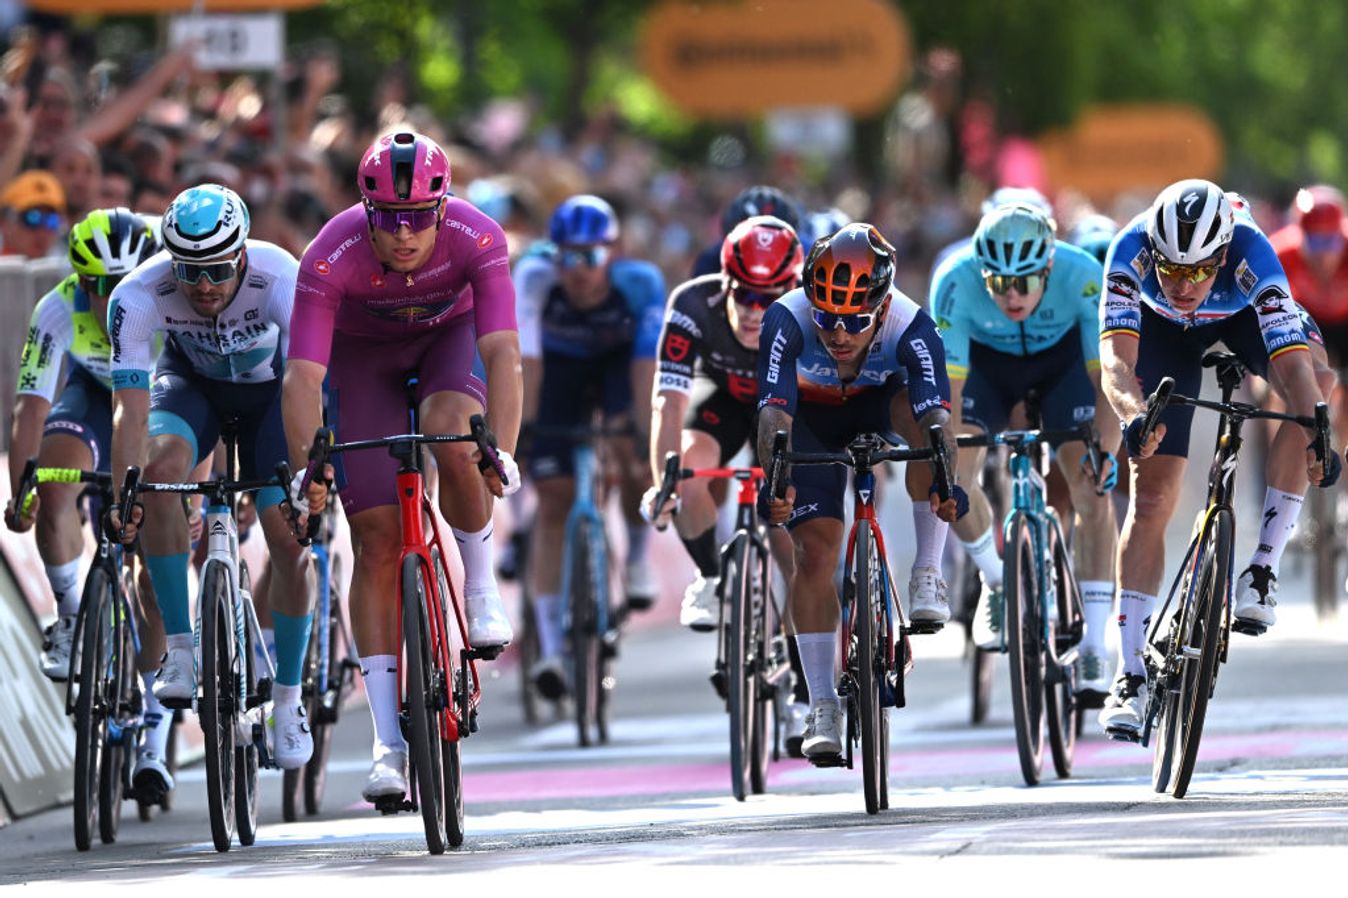 Caleb Ewan was second from the bunch on stage 5 of the Giro d'Italia